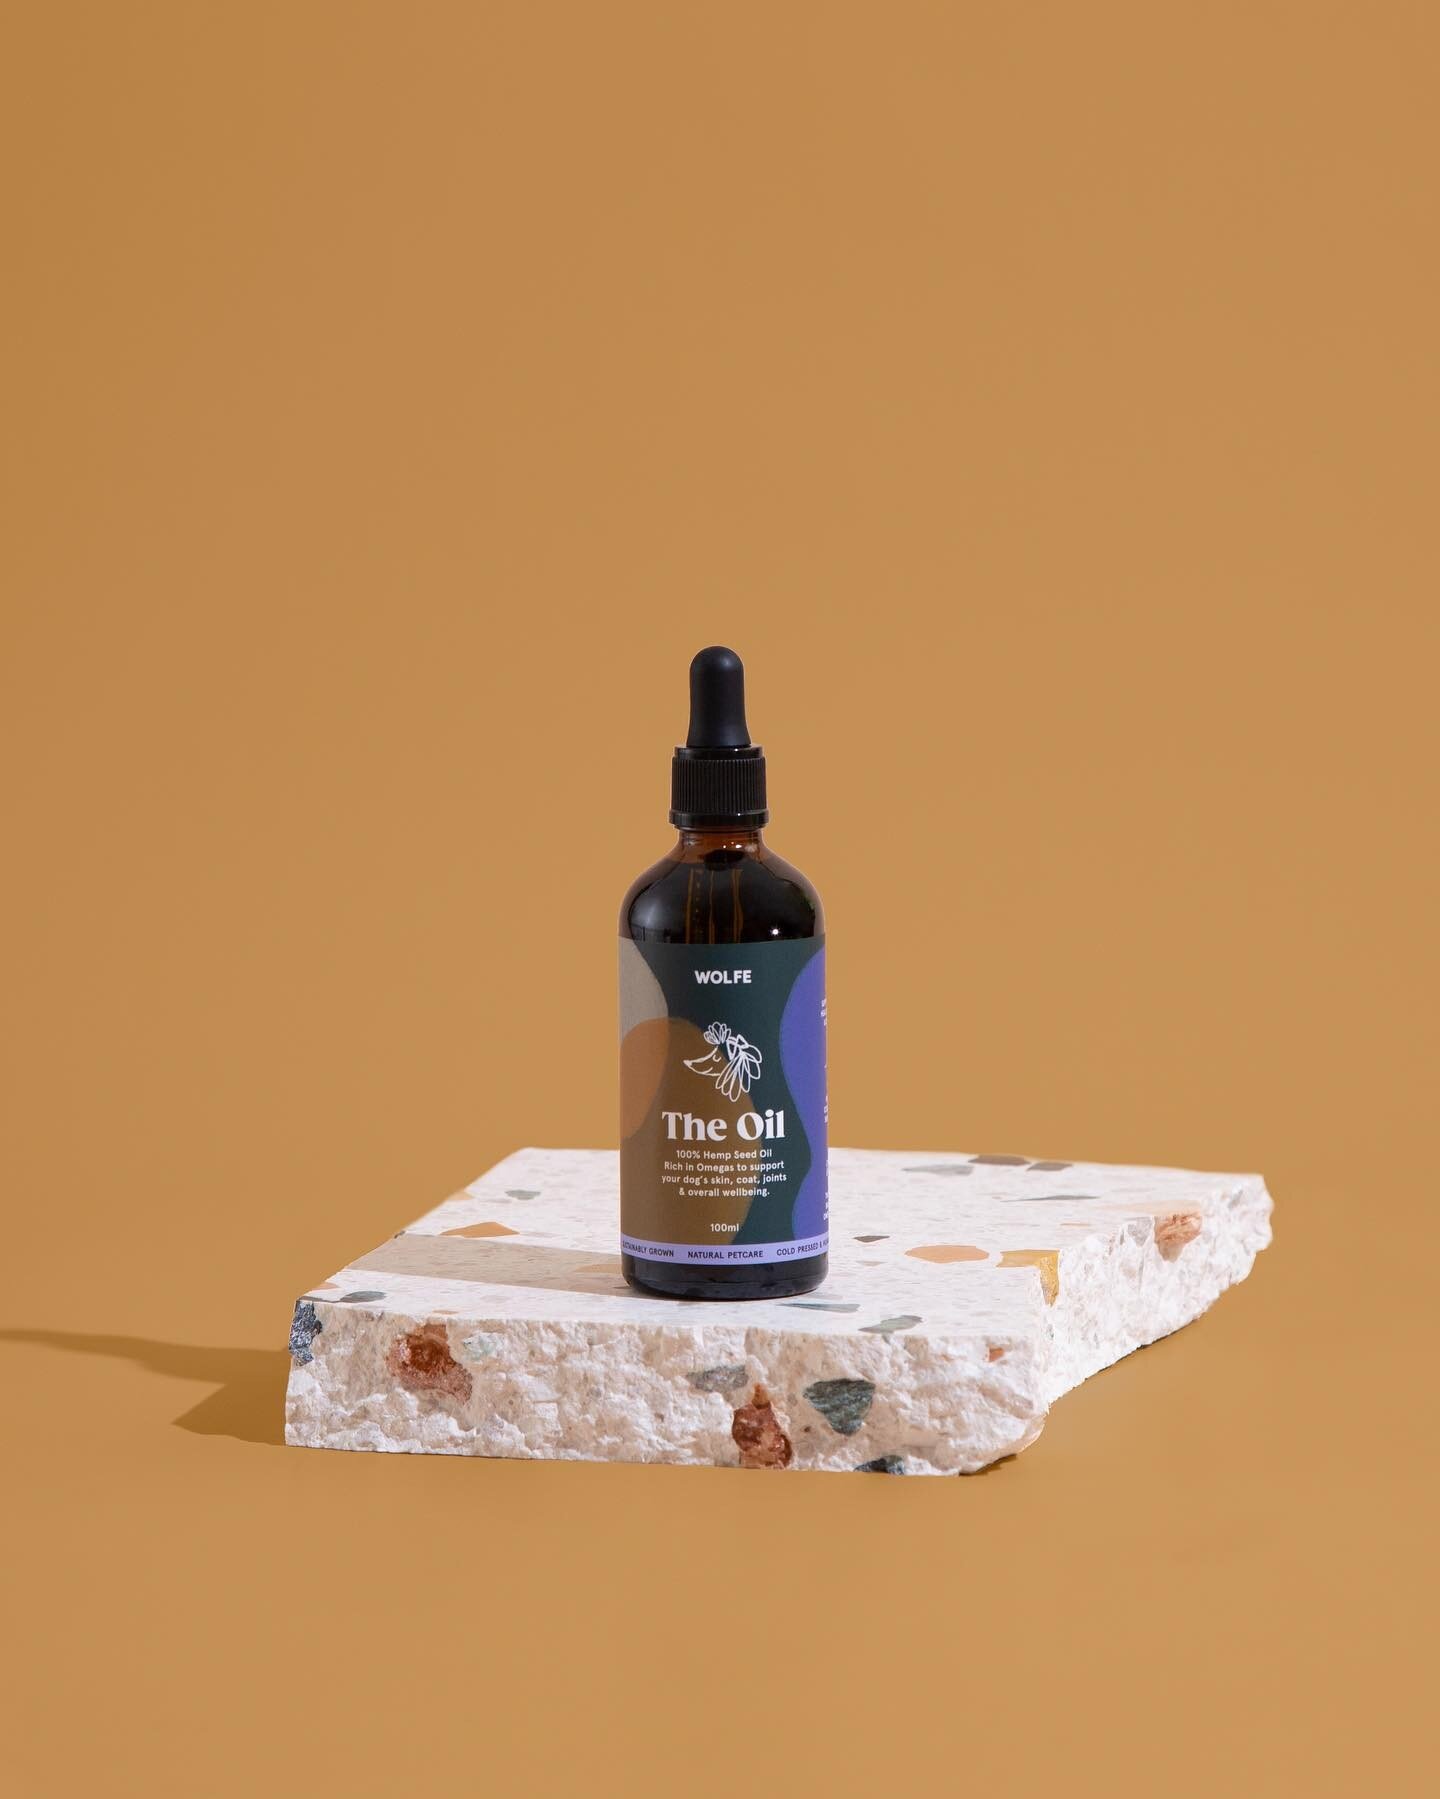 Amber bottles + beautiful labels + terrazzo. Key ingredients for the perfect minimal scene 🤌

Recent photography work for @wolfepetcare 
Design and direction by @heysoulstudio